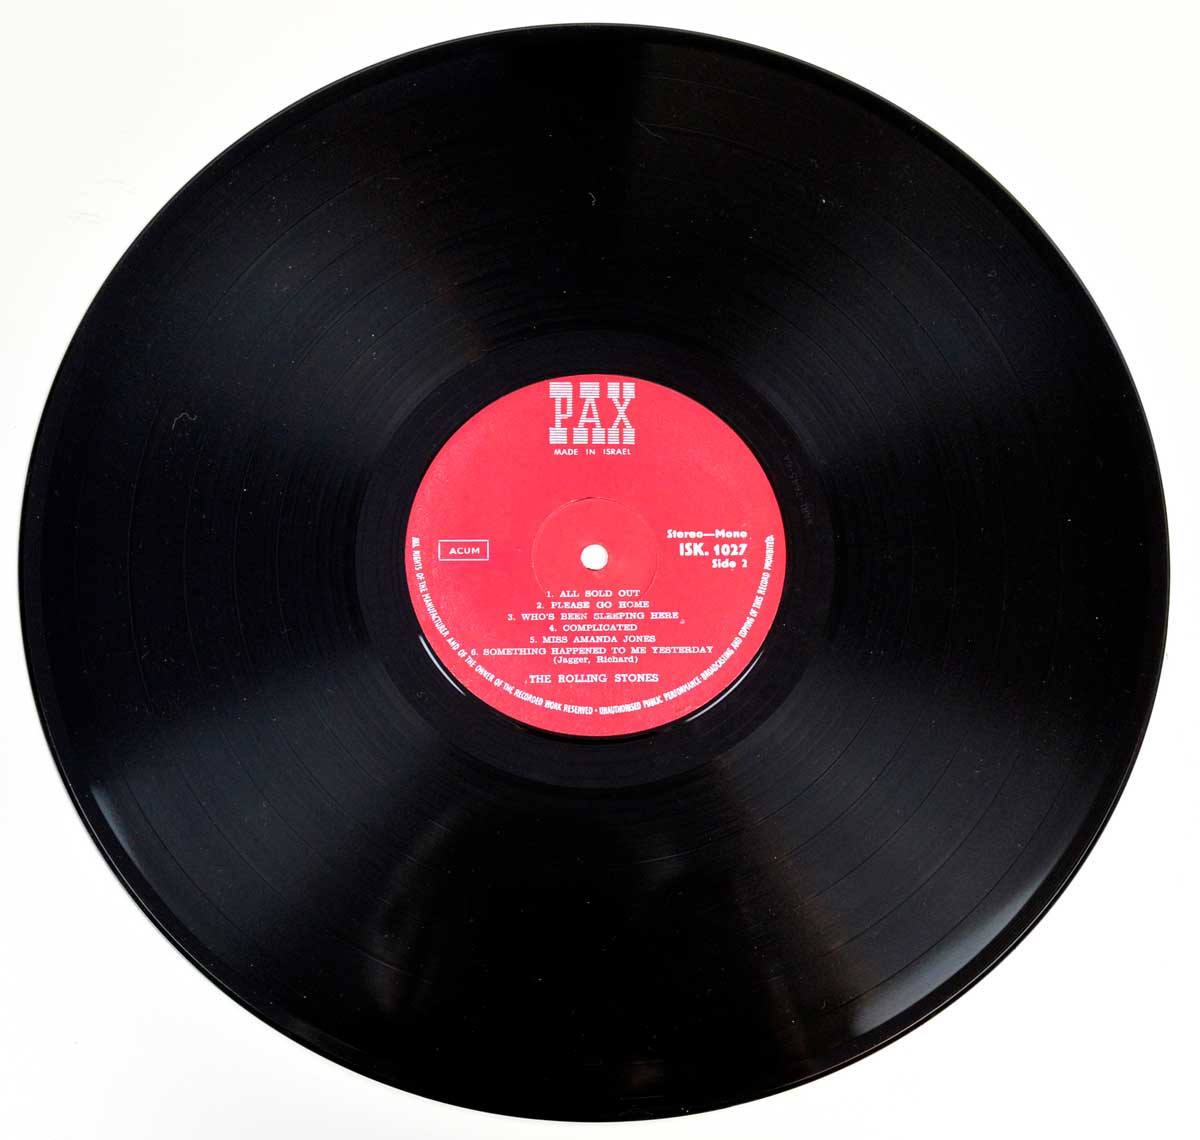 Photo of "ROLLING STONES Between Buttons" 12" LP Record - Side Two: